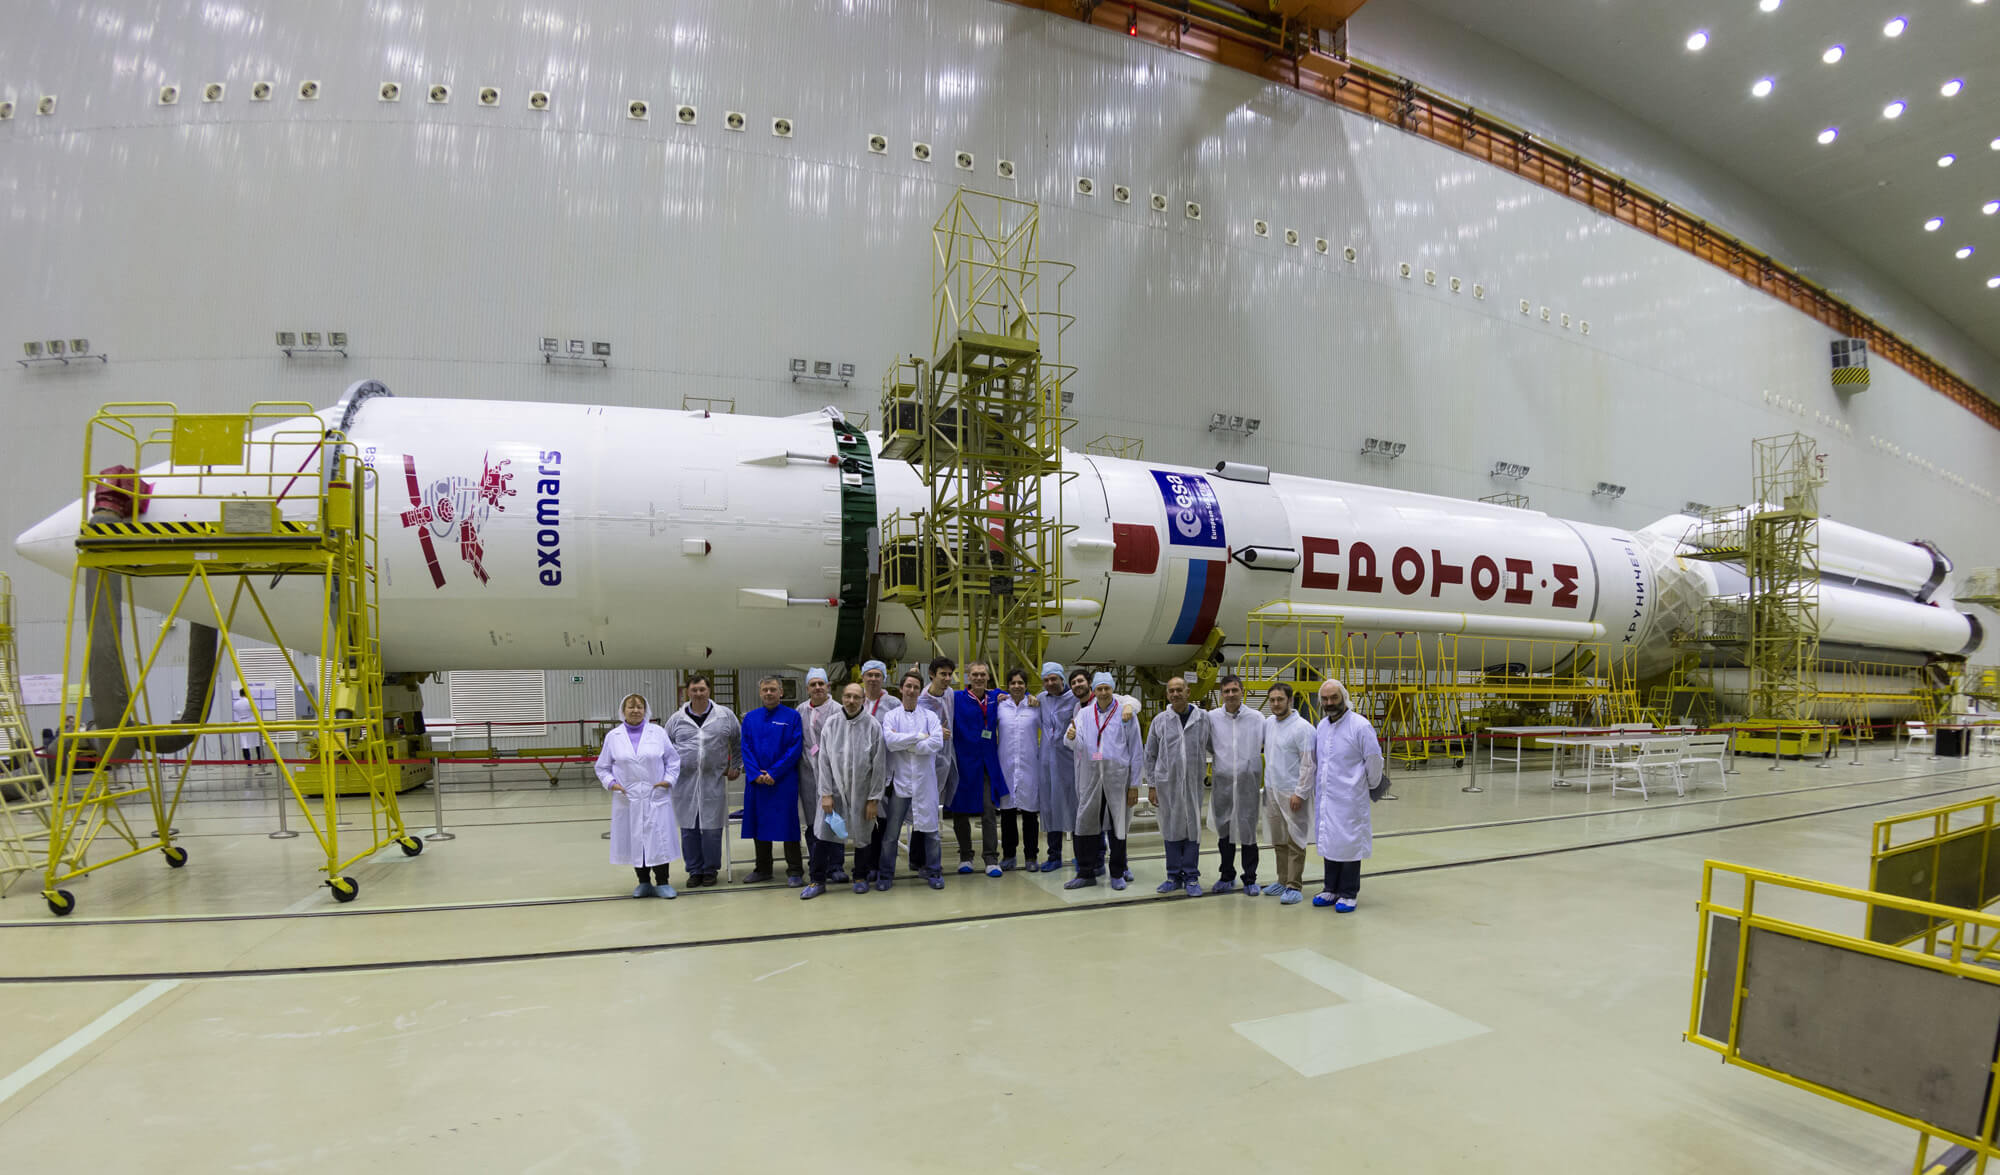 ExoMars Team in front of Proton